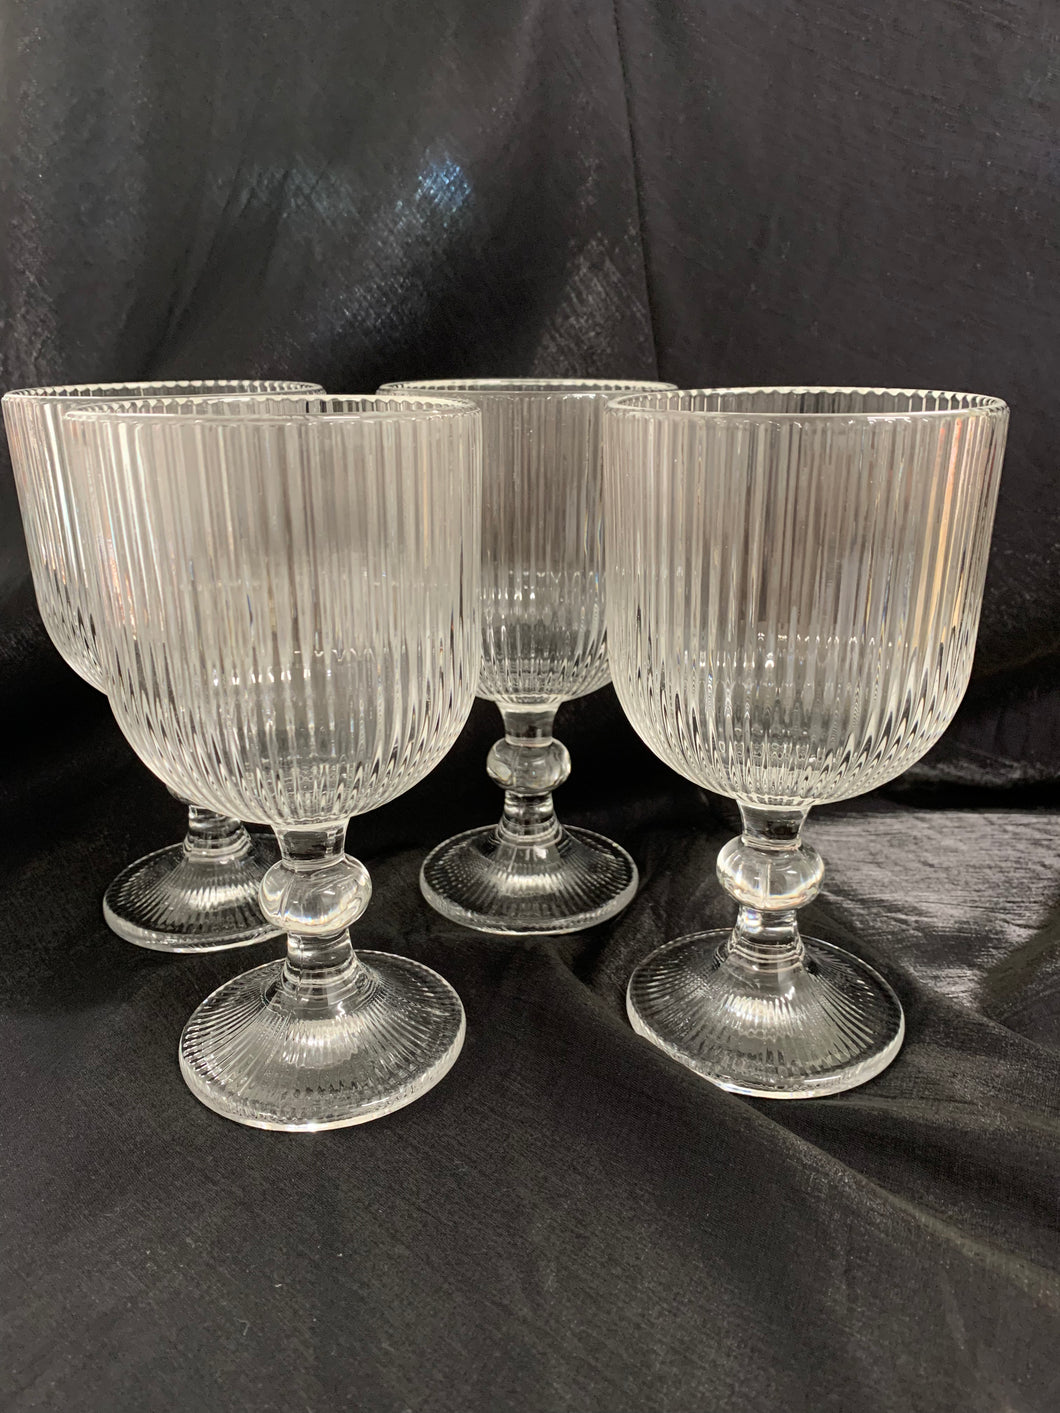 Clear Ribbed Wine Glass